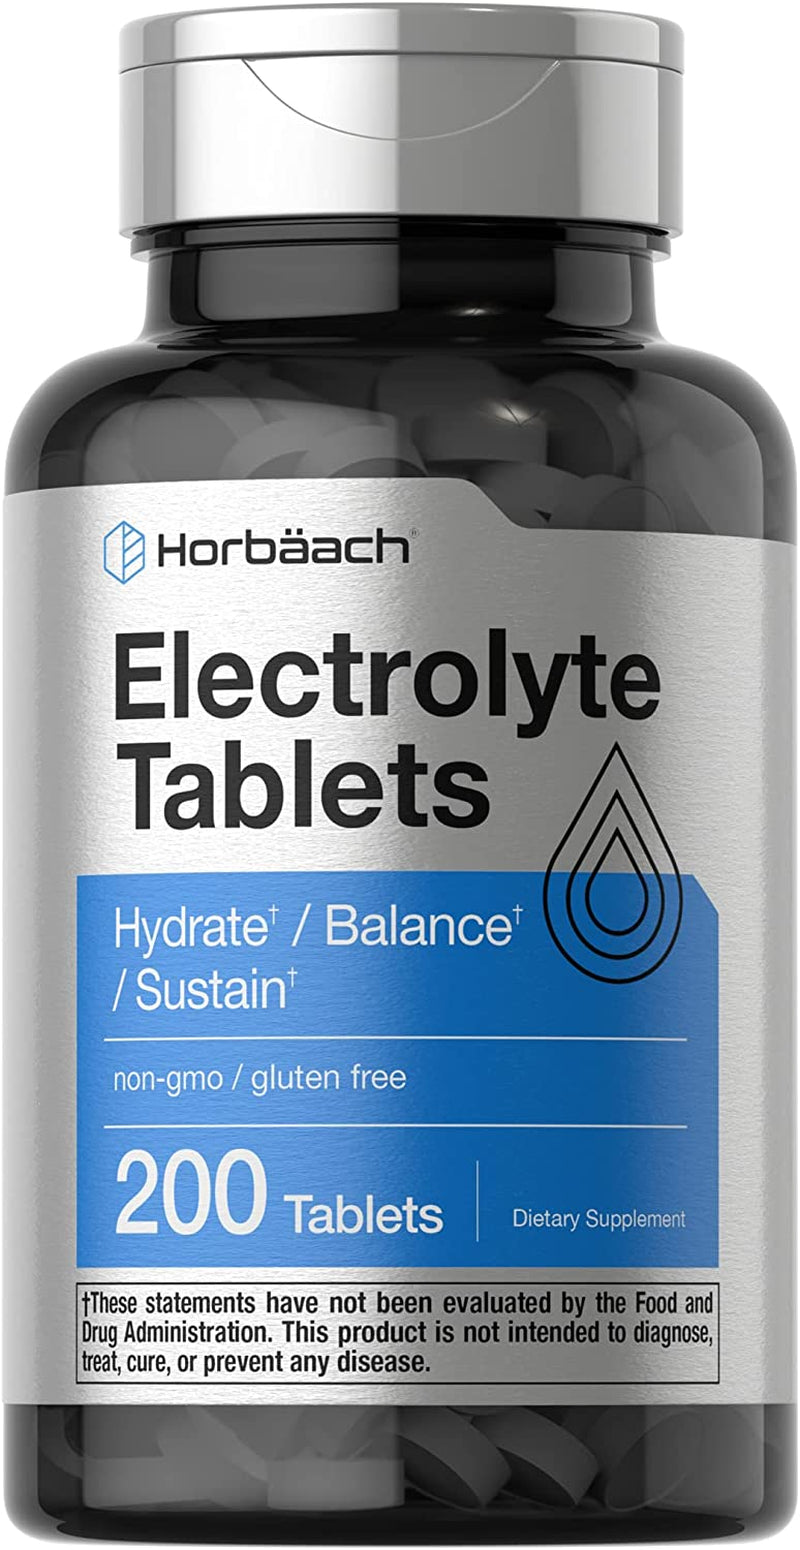 Electrolyte Tablets | 200 Count | Vegetarian | Keto-Friendly | Non-Gmo, and Gluten Free Hydration Supplement | by Horbaach